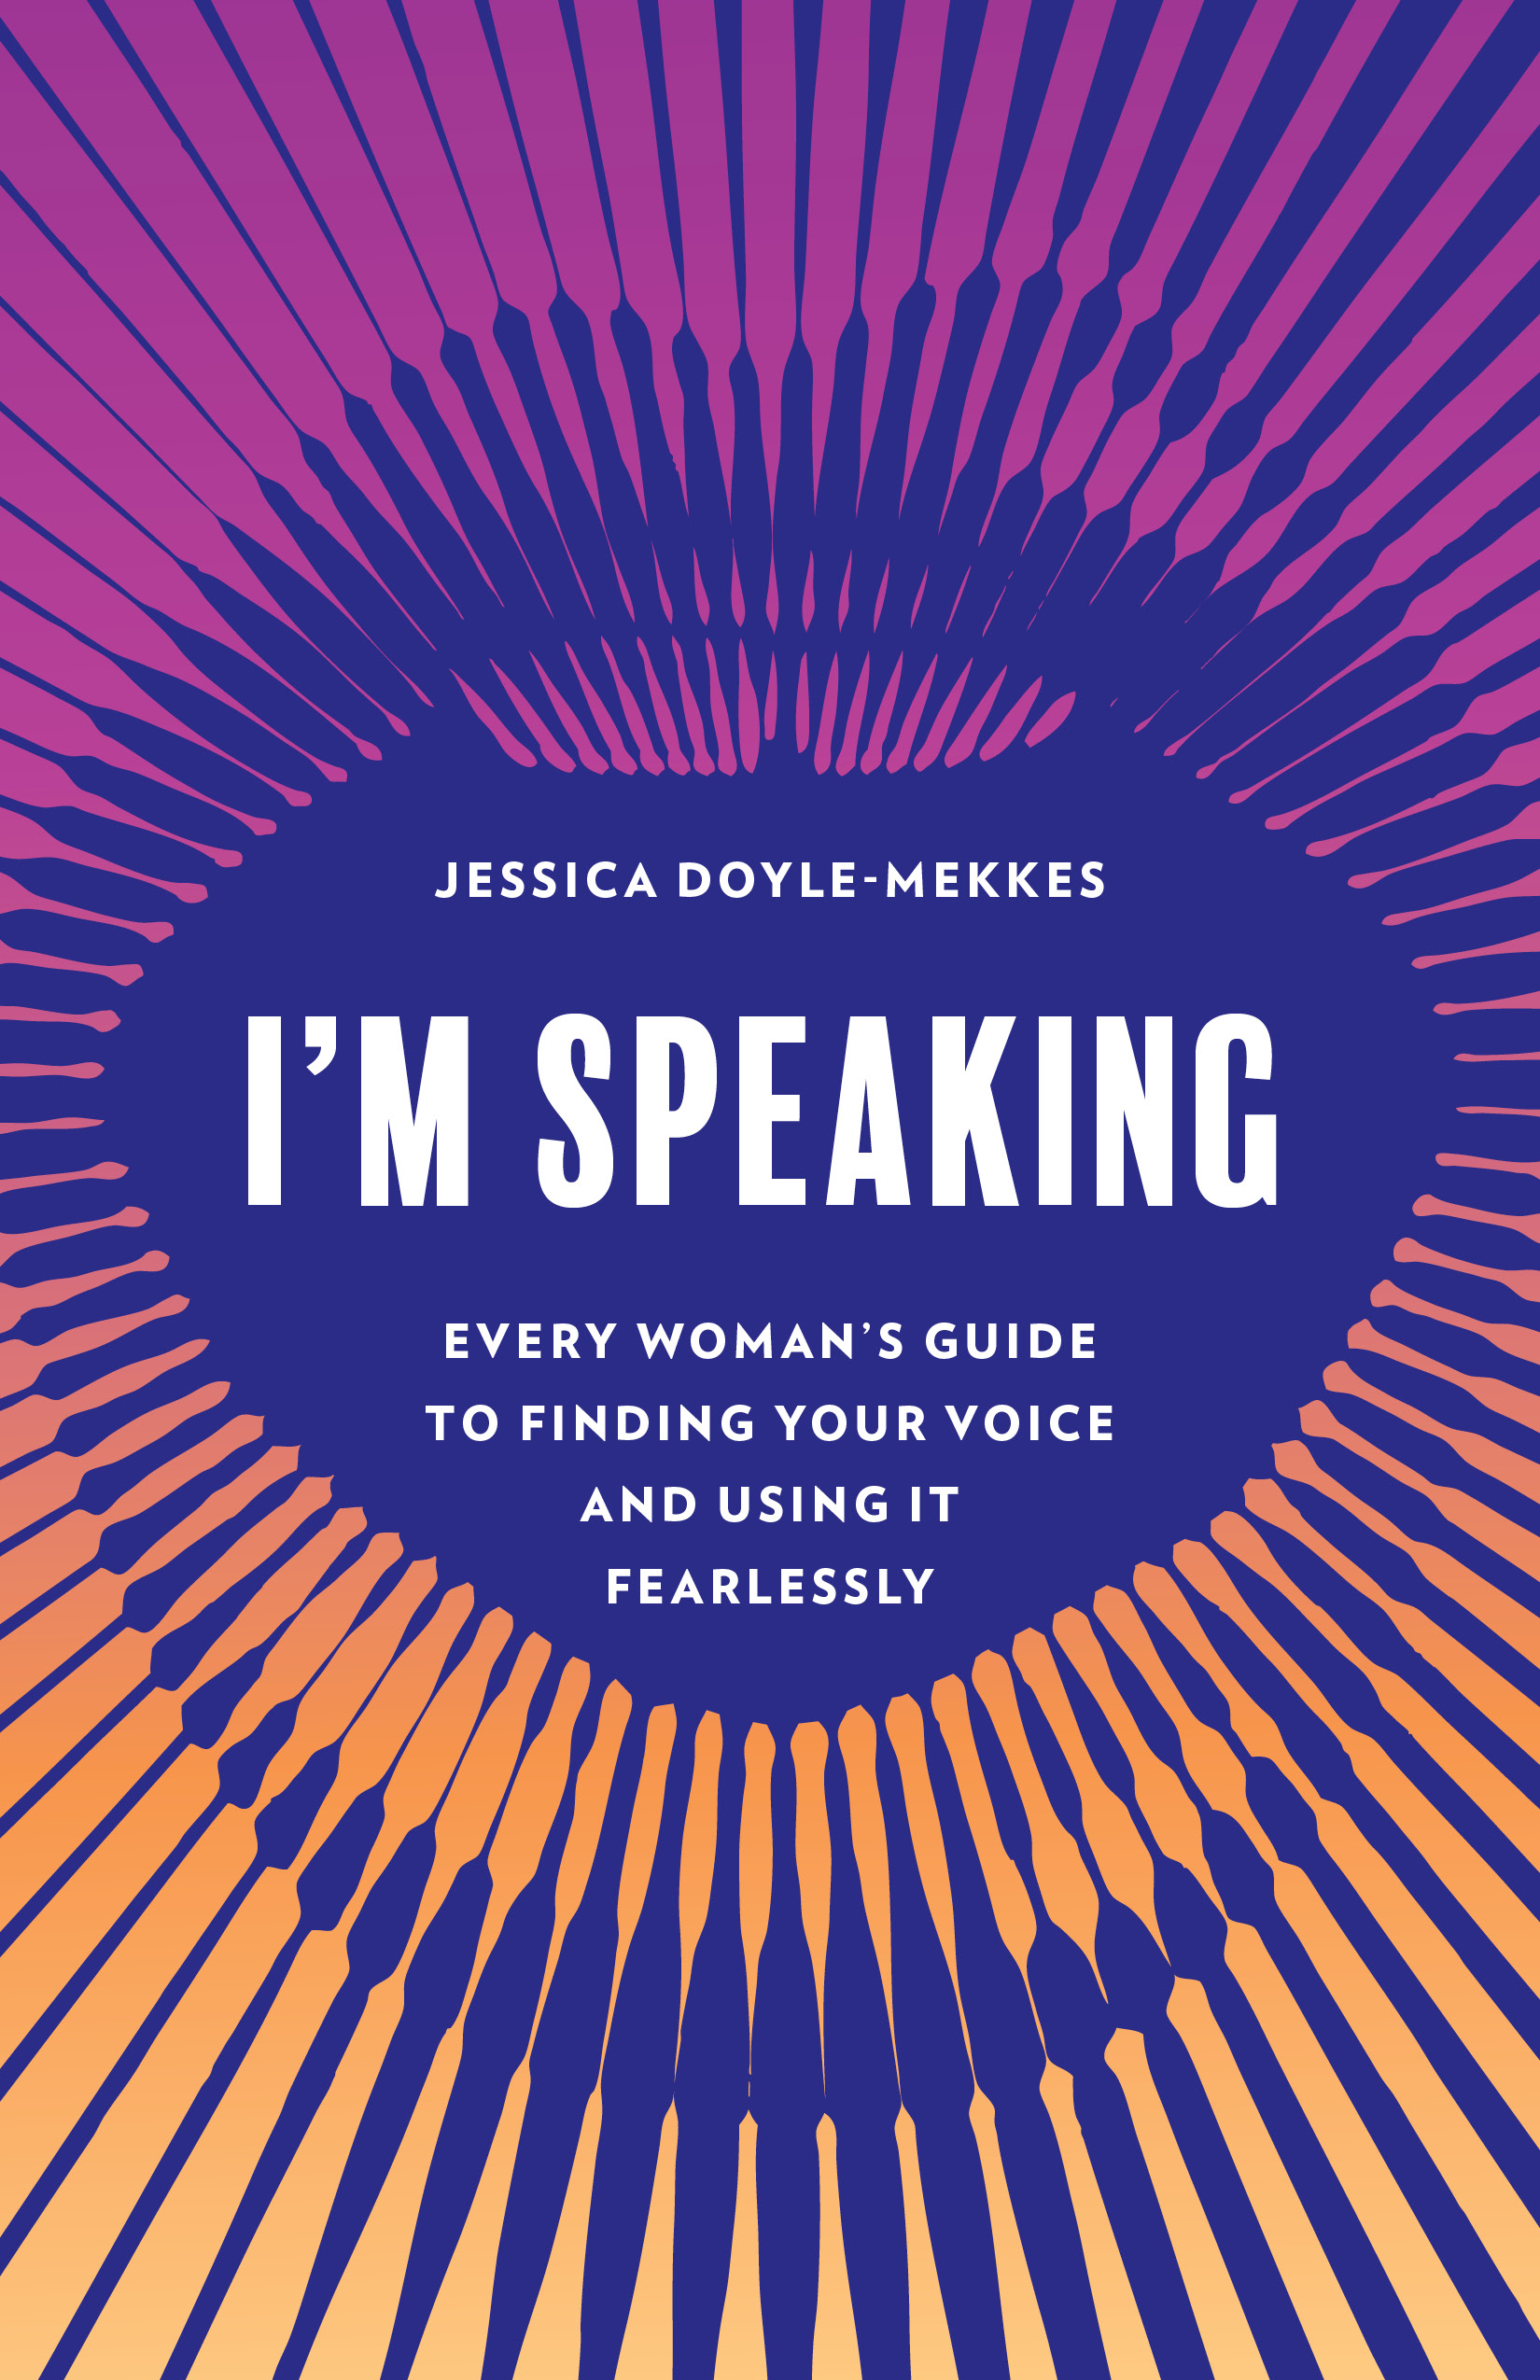 I'm Speaking: Every Woman's Guide to Finding Your Voice and Using It Fearlessly